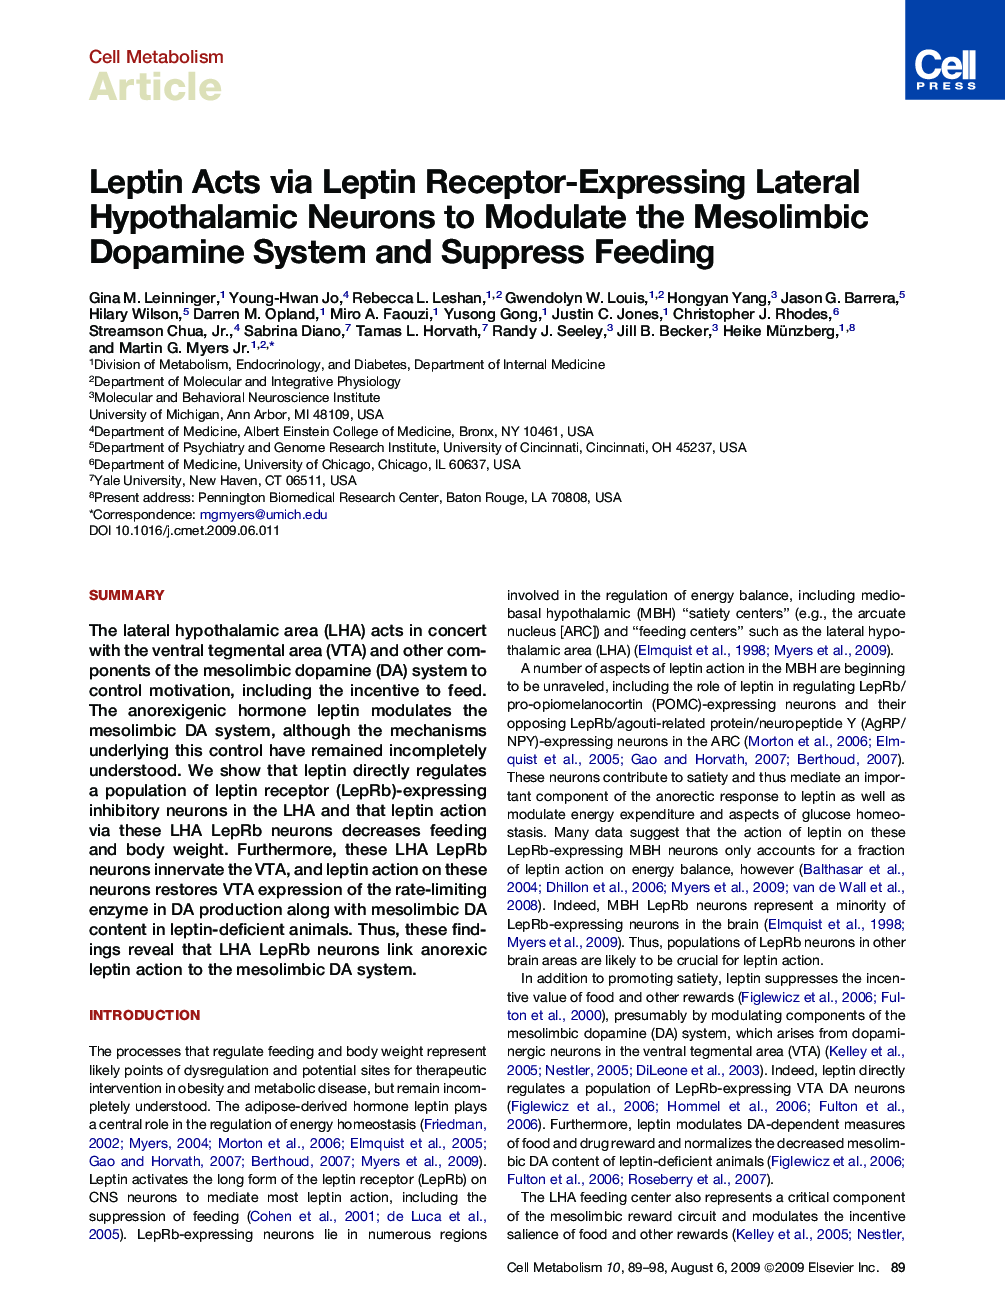 Leptin Acts via Leptin Receptor-Expressing Lateral Hypothalamic Neurons to Modulate the Mesolimbic Dopamine System and Suppress Feeding